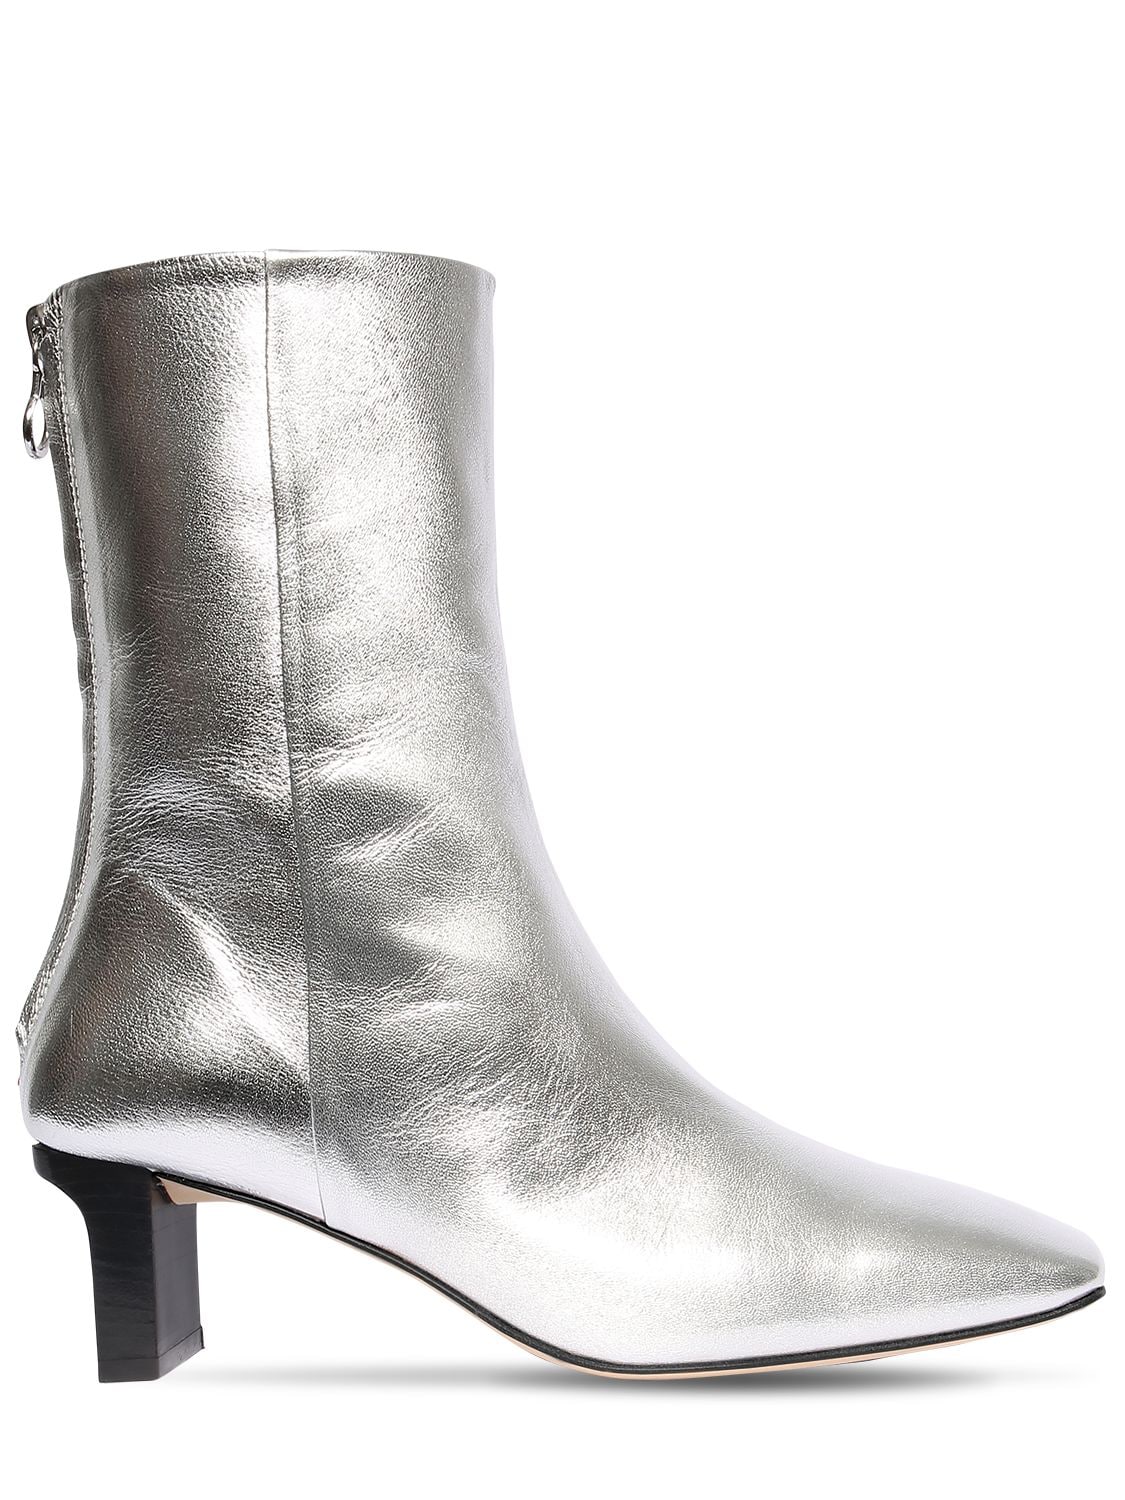 AEYDE 55mm Tilly Metallic Leather Ankle Boots